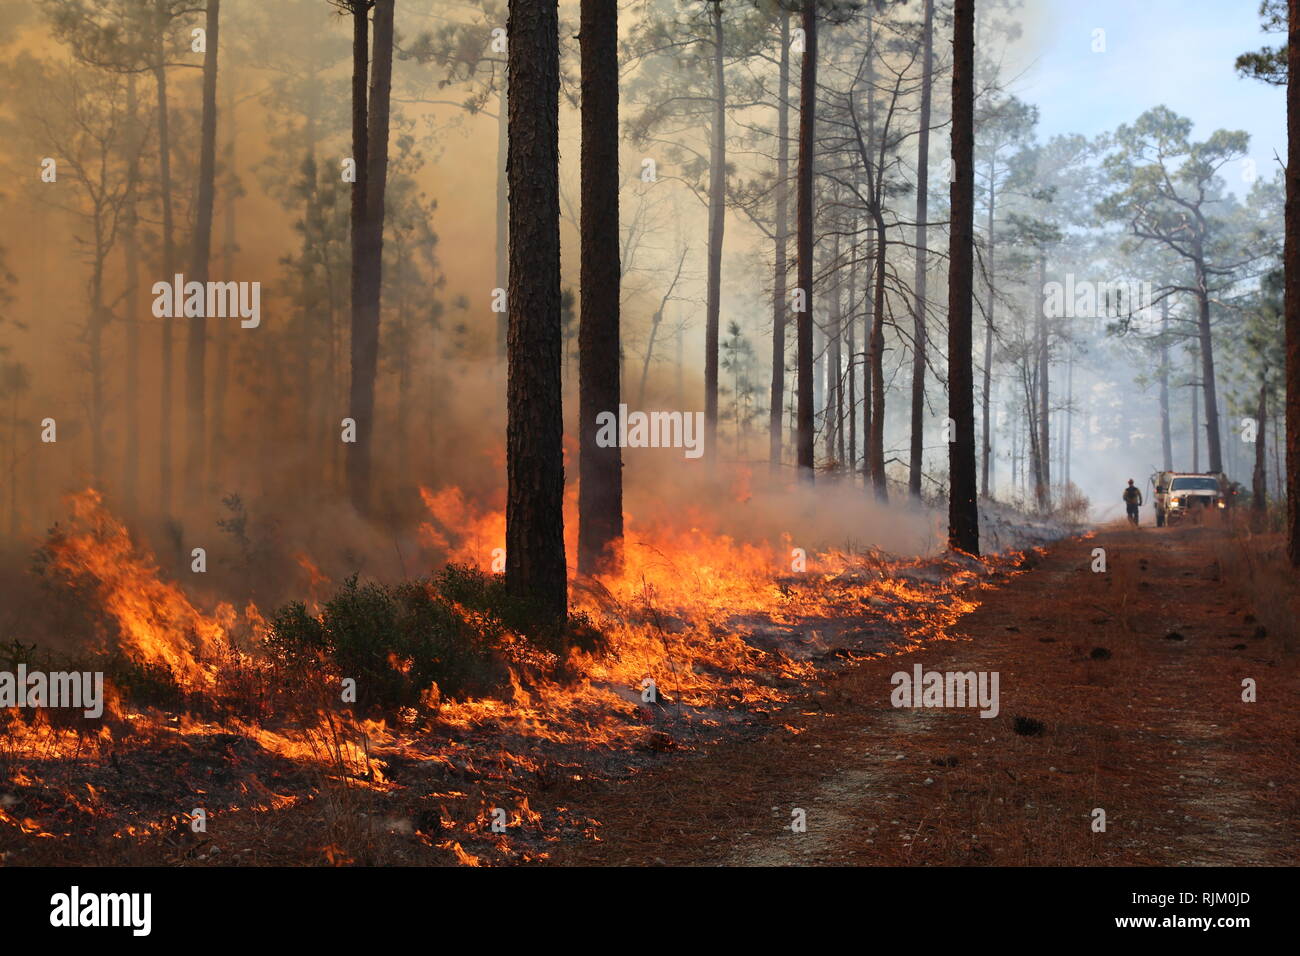 The beginning stages of a prescribed burn as the wind guides it, causing it to grow larger in the LE training area, Marine Corps Base Camp Lejeune, Jan. 30., 2019. Prescribed burns are used to effectively restore the native ecosystems and to reduce risk of an uncontrolled wild fire. (U.S. Marine Corps photo by Lance Cpl. Ashley Gomez) Stock Photo